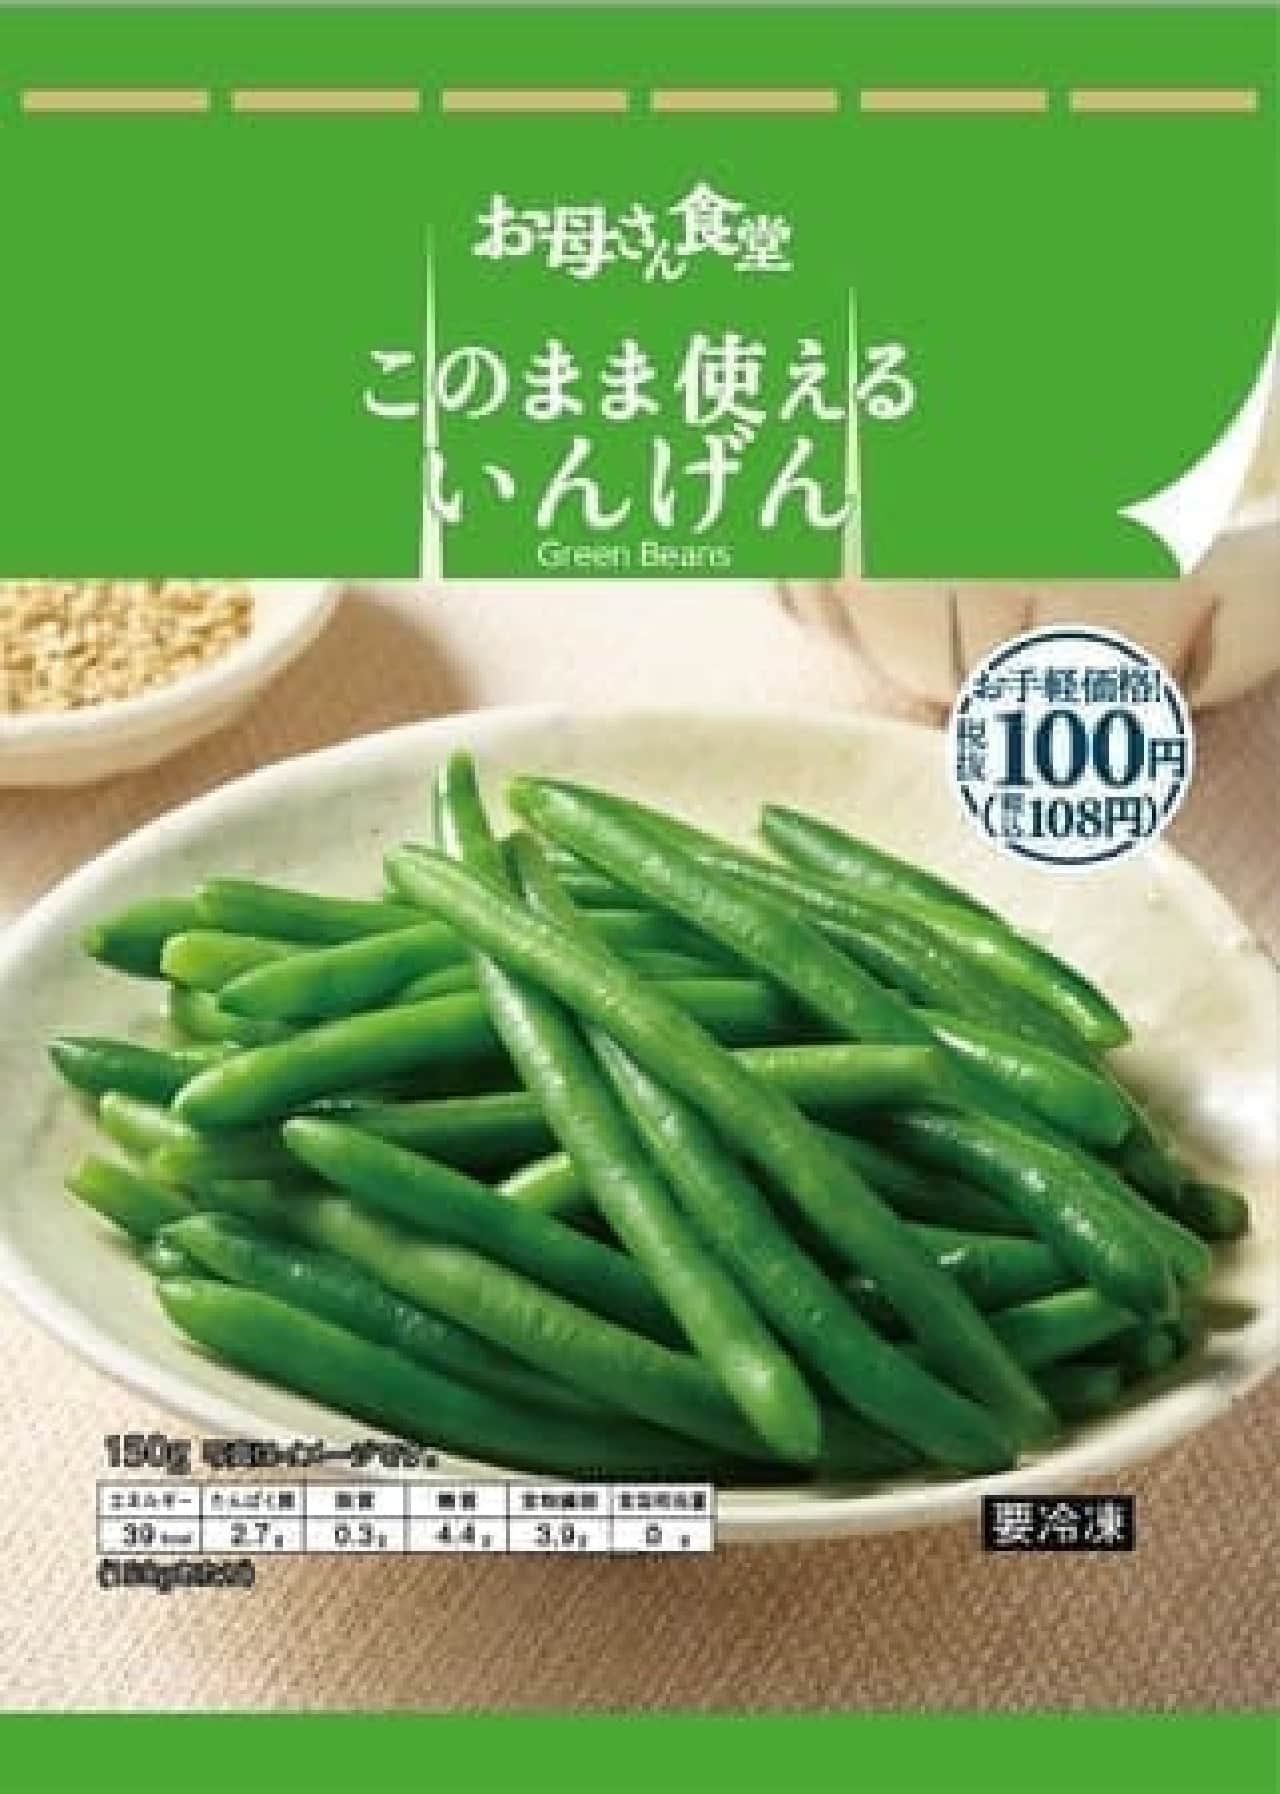 FamilyMart "Green beans that can be used as they are"